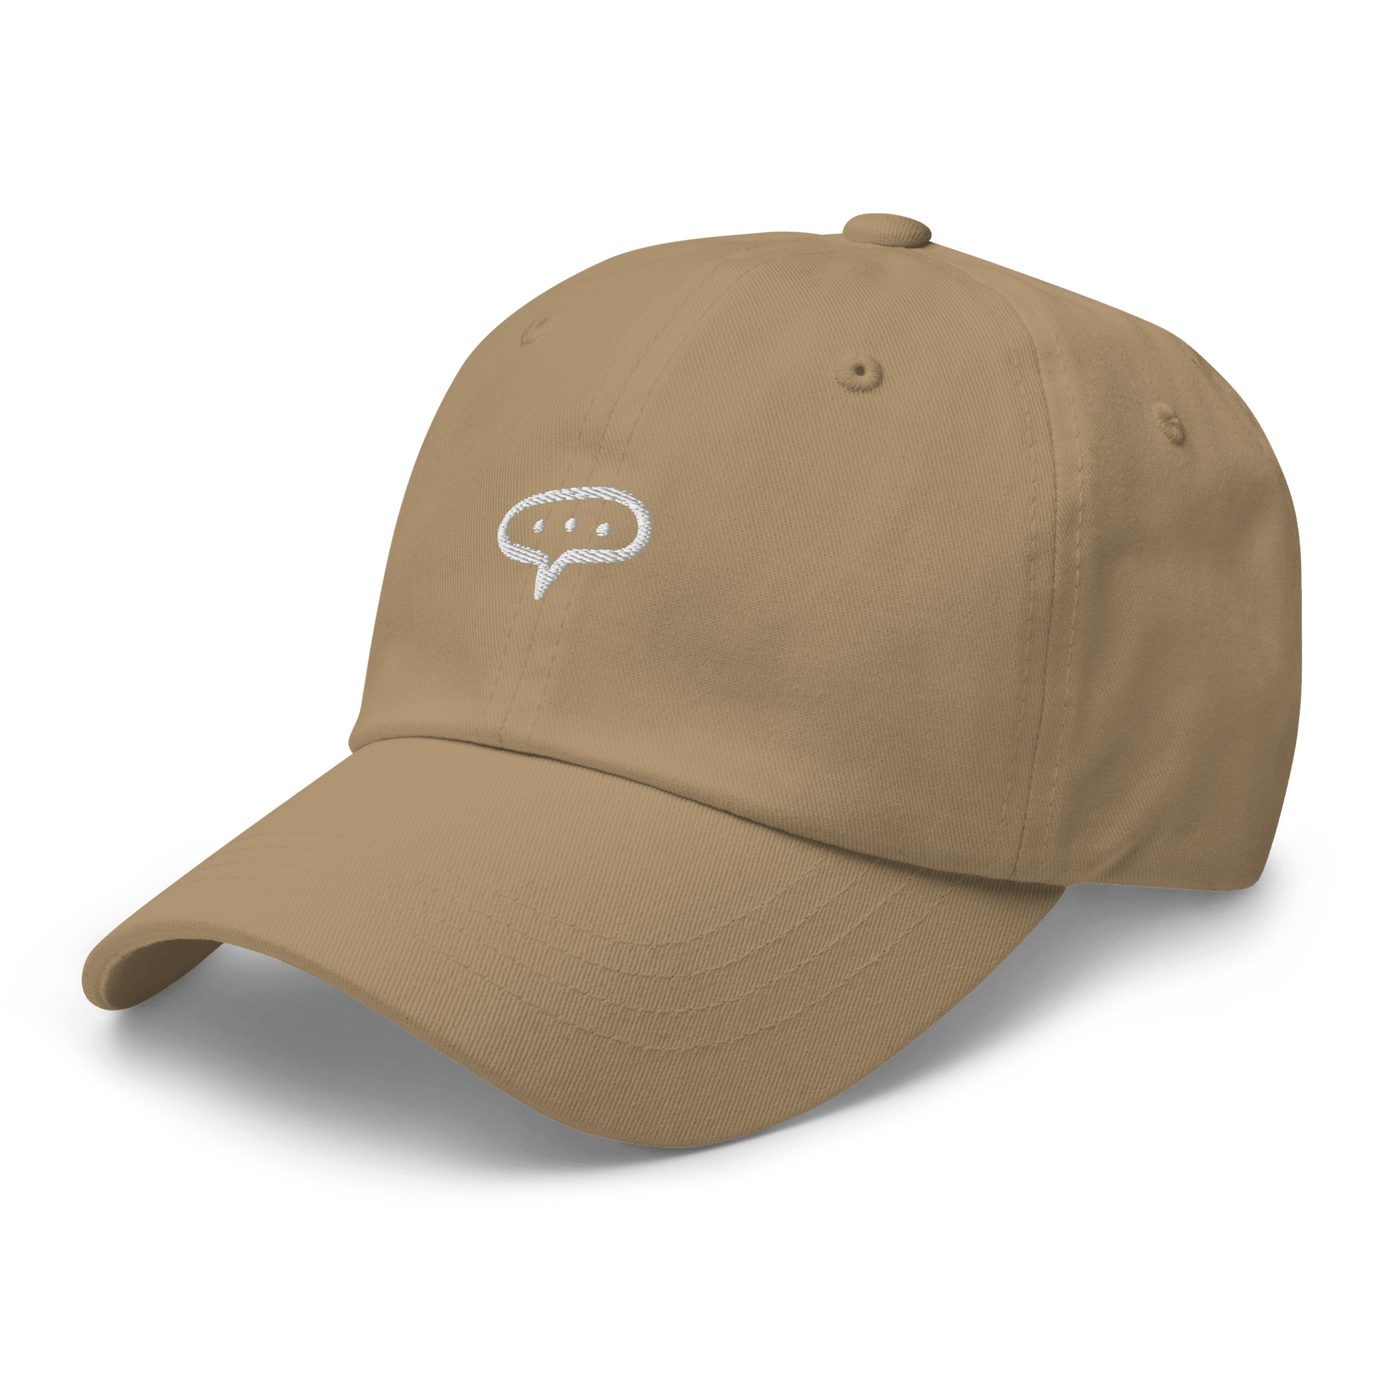 Thinking Dad hat - Navy - - Just Another Cap Store